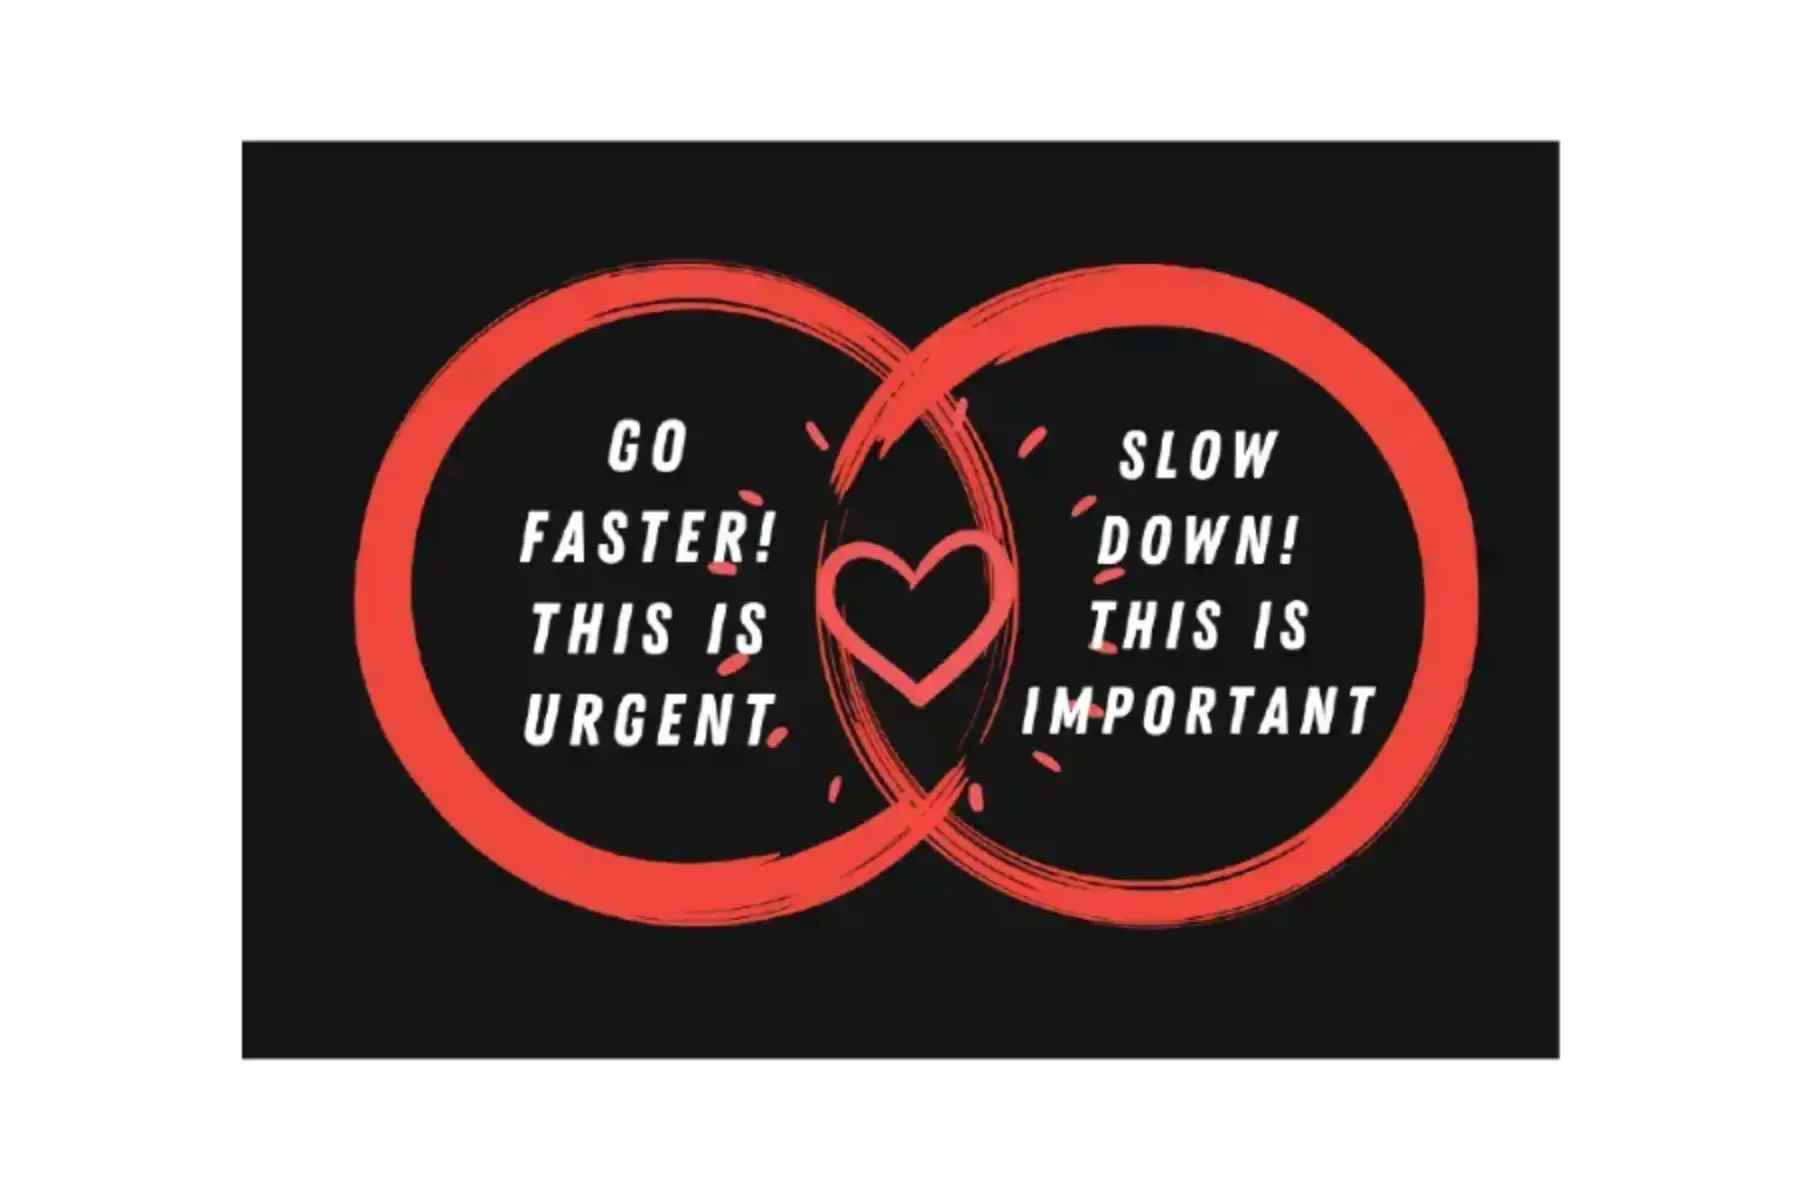 Black background with two overlapping circles. The circles have a red border and a heart when they overlap. The left circle has white text inside that reads Go faster! This is urgent. The circle on the right reads Slow down! This is important.